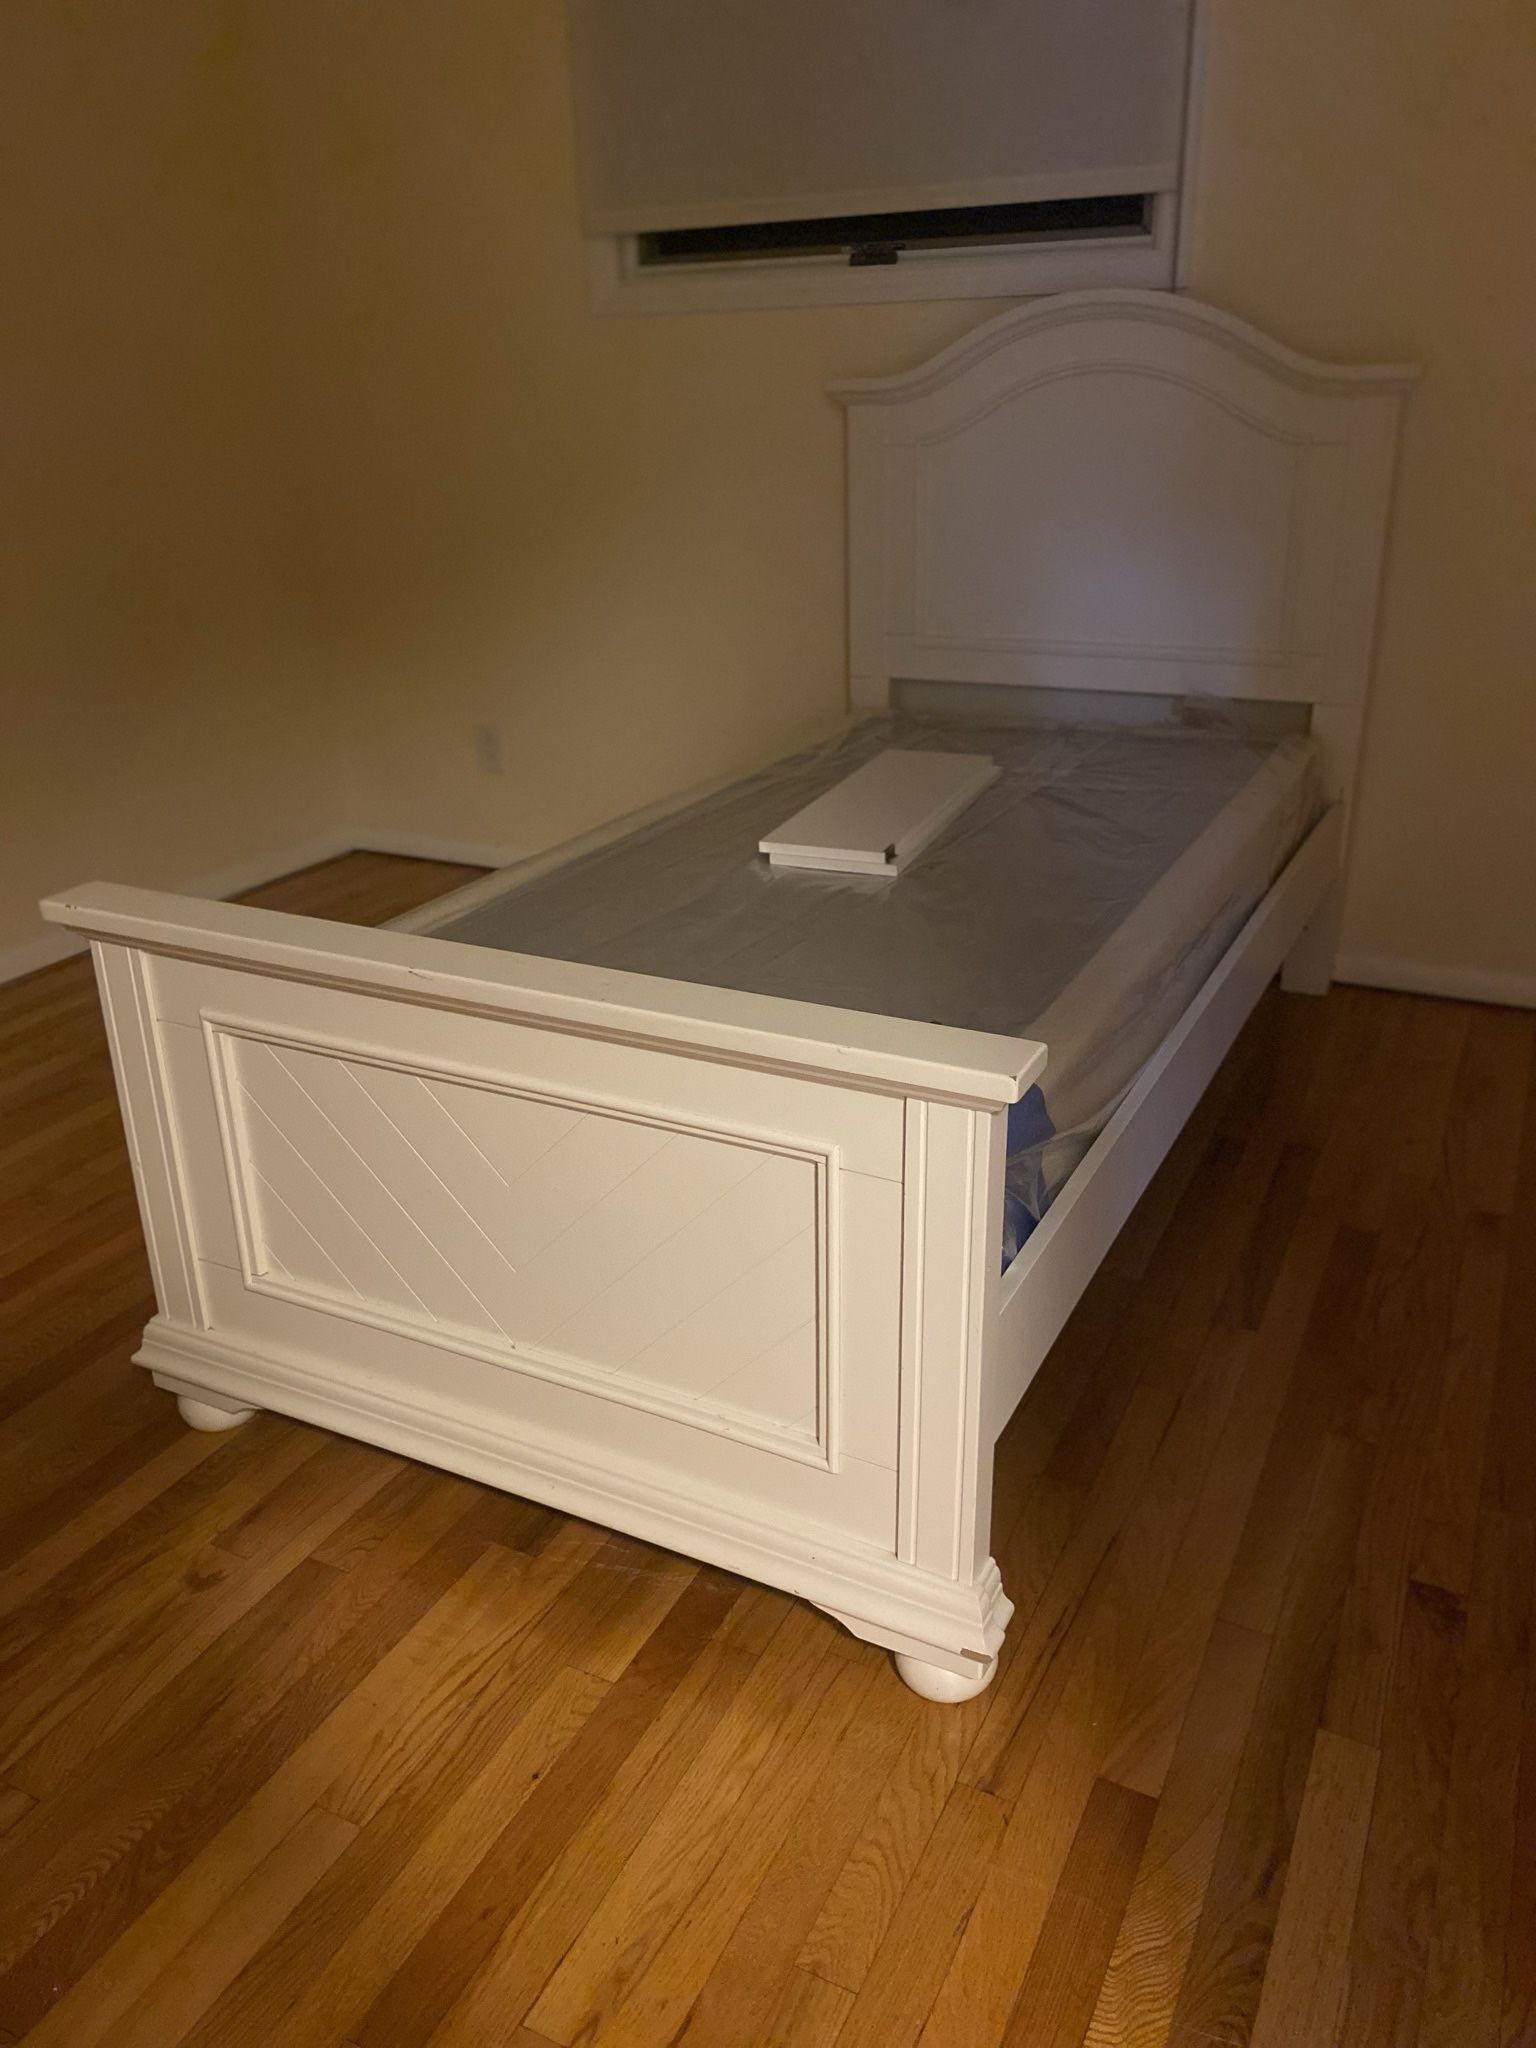 White Twin Bed Frame For Sale $120 